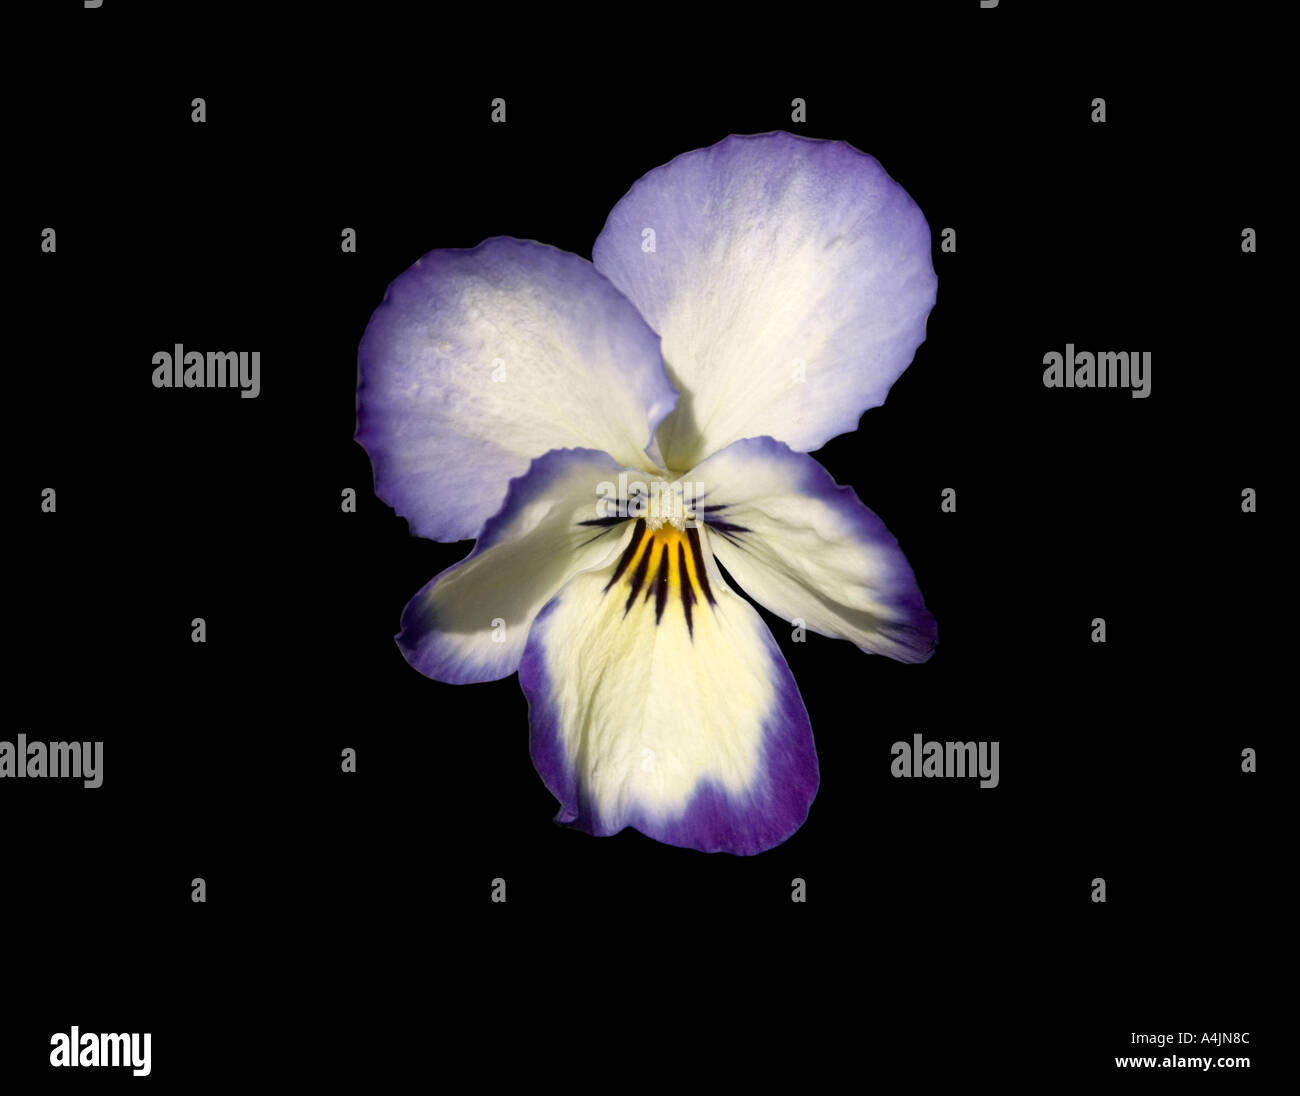 Single purple and white pansy flower against a black background Stock Photo